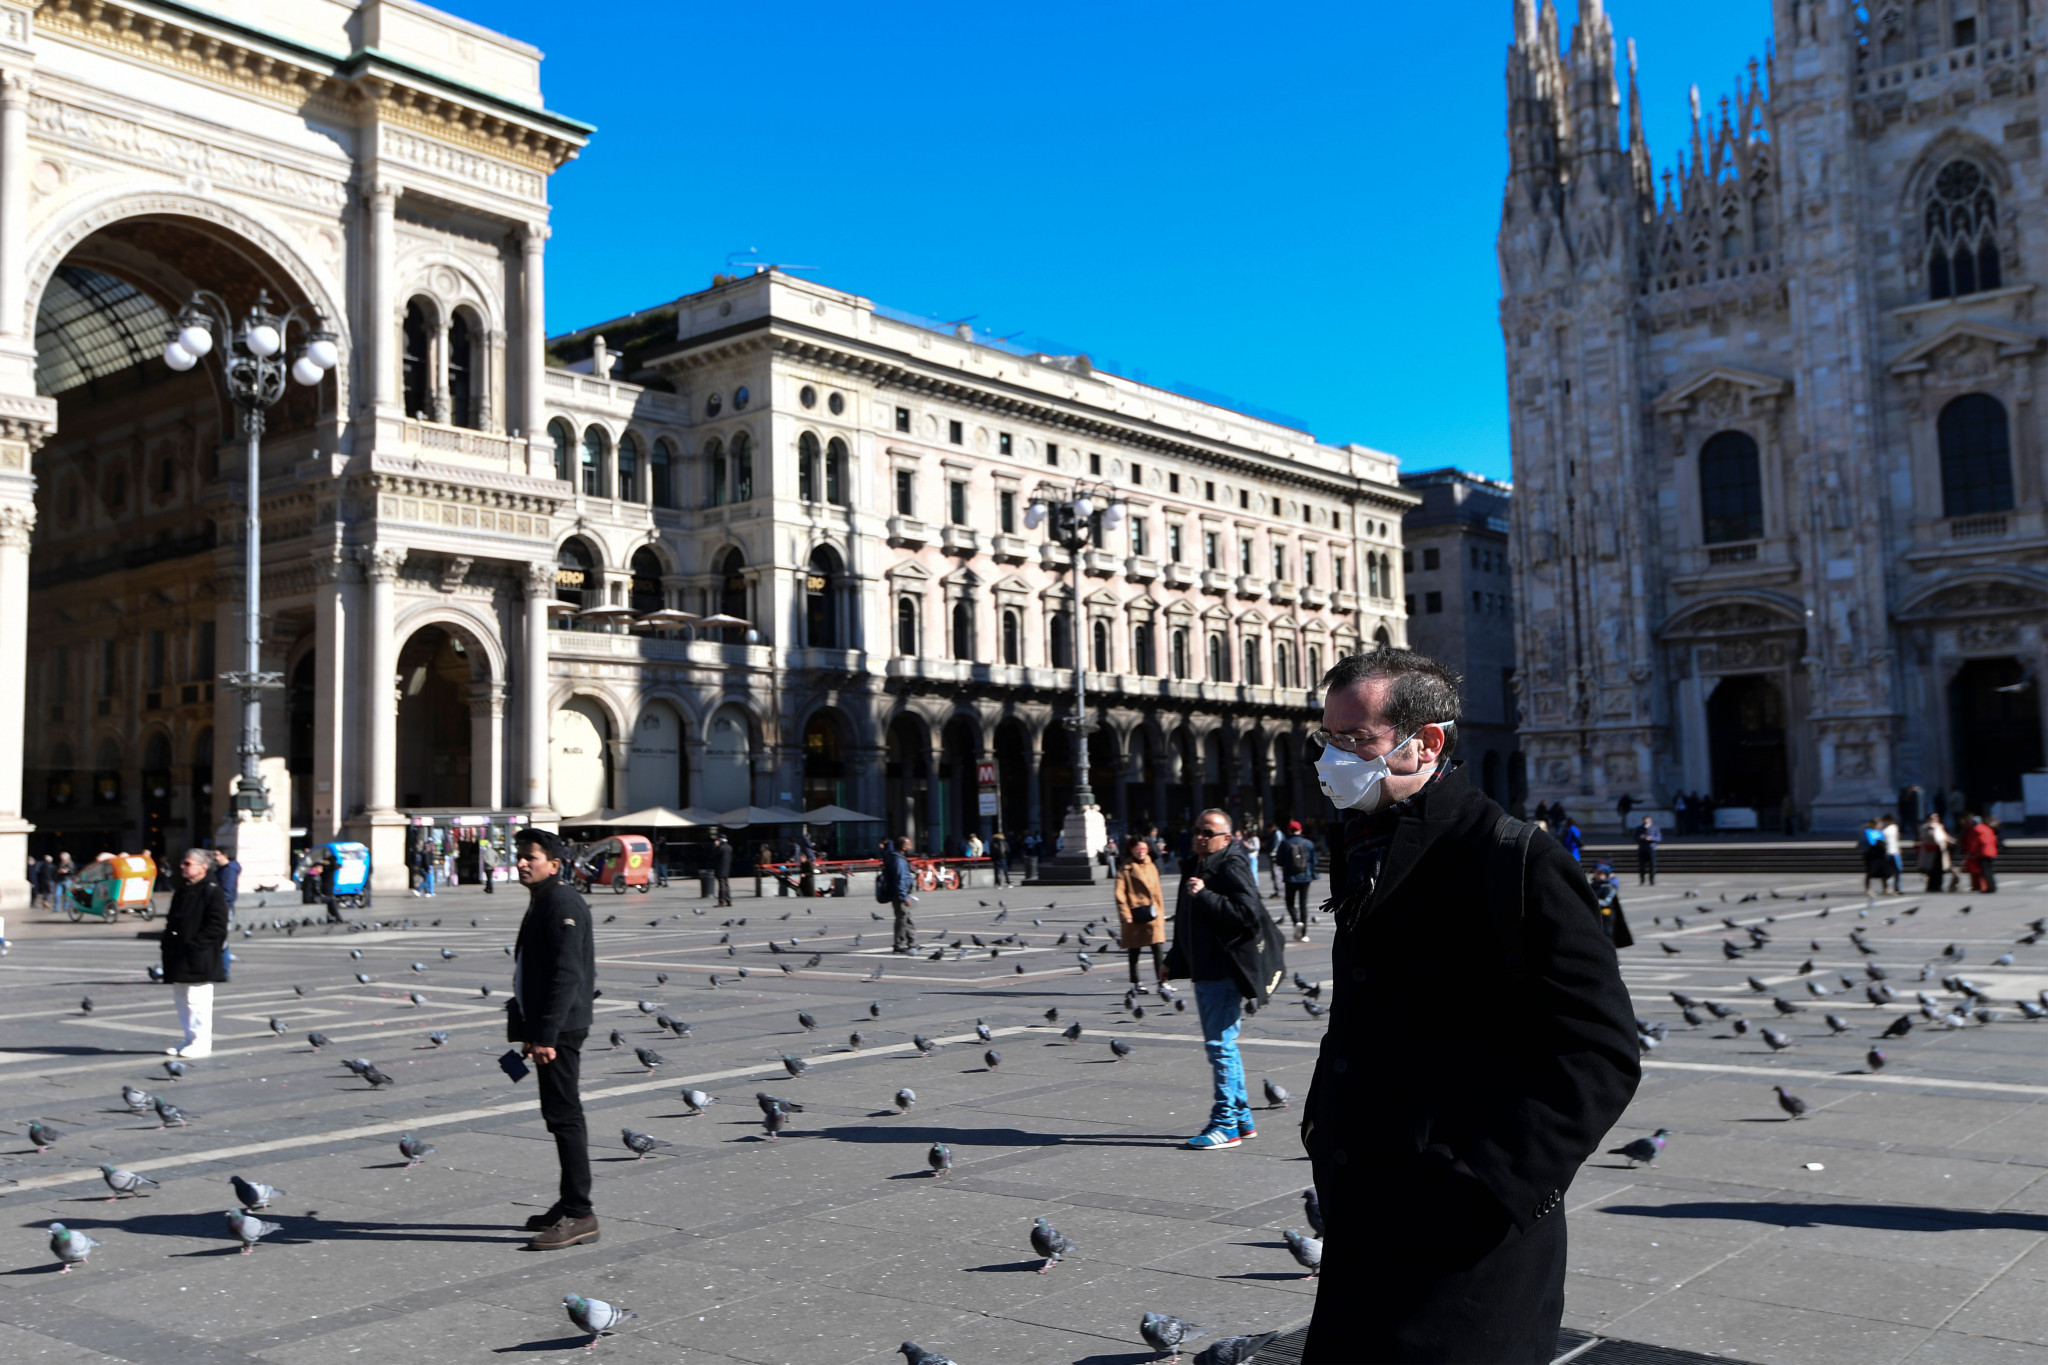 A number of tourist and cultural sites in Milan have been closed due to the outbreak of coronavirus, while sporting events have been postponed or cancelled ©Getty Images